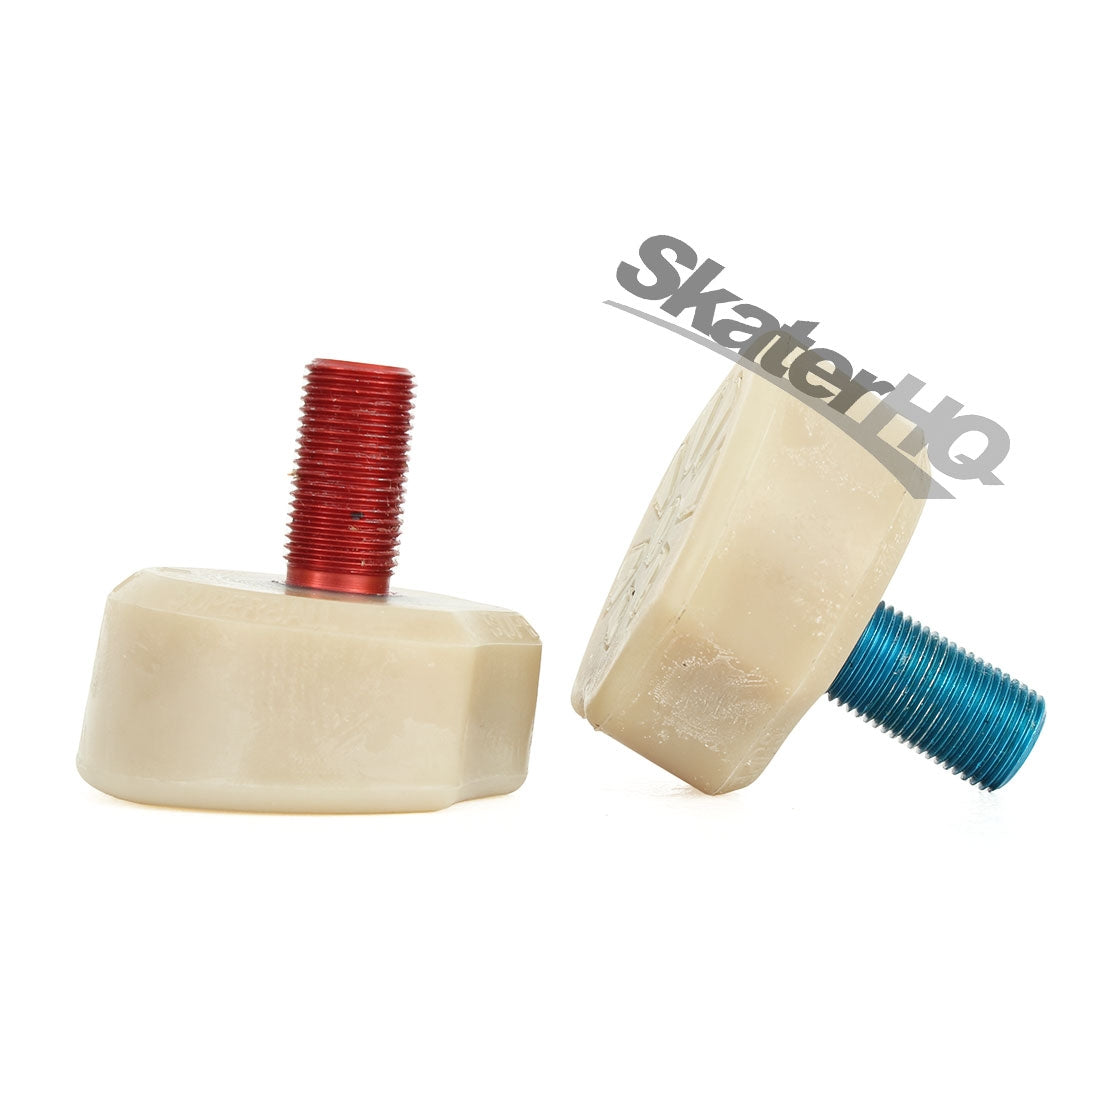 Gumball Superball Toe Stops - Long/Standard - Natural Roller Skate Hardware and Parts